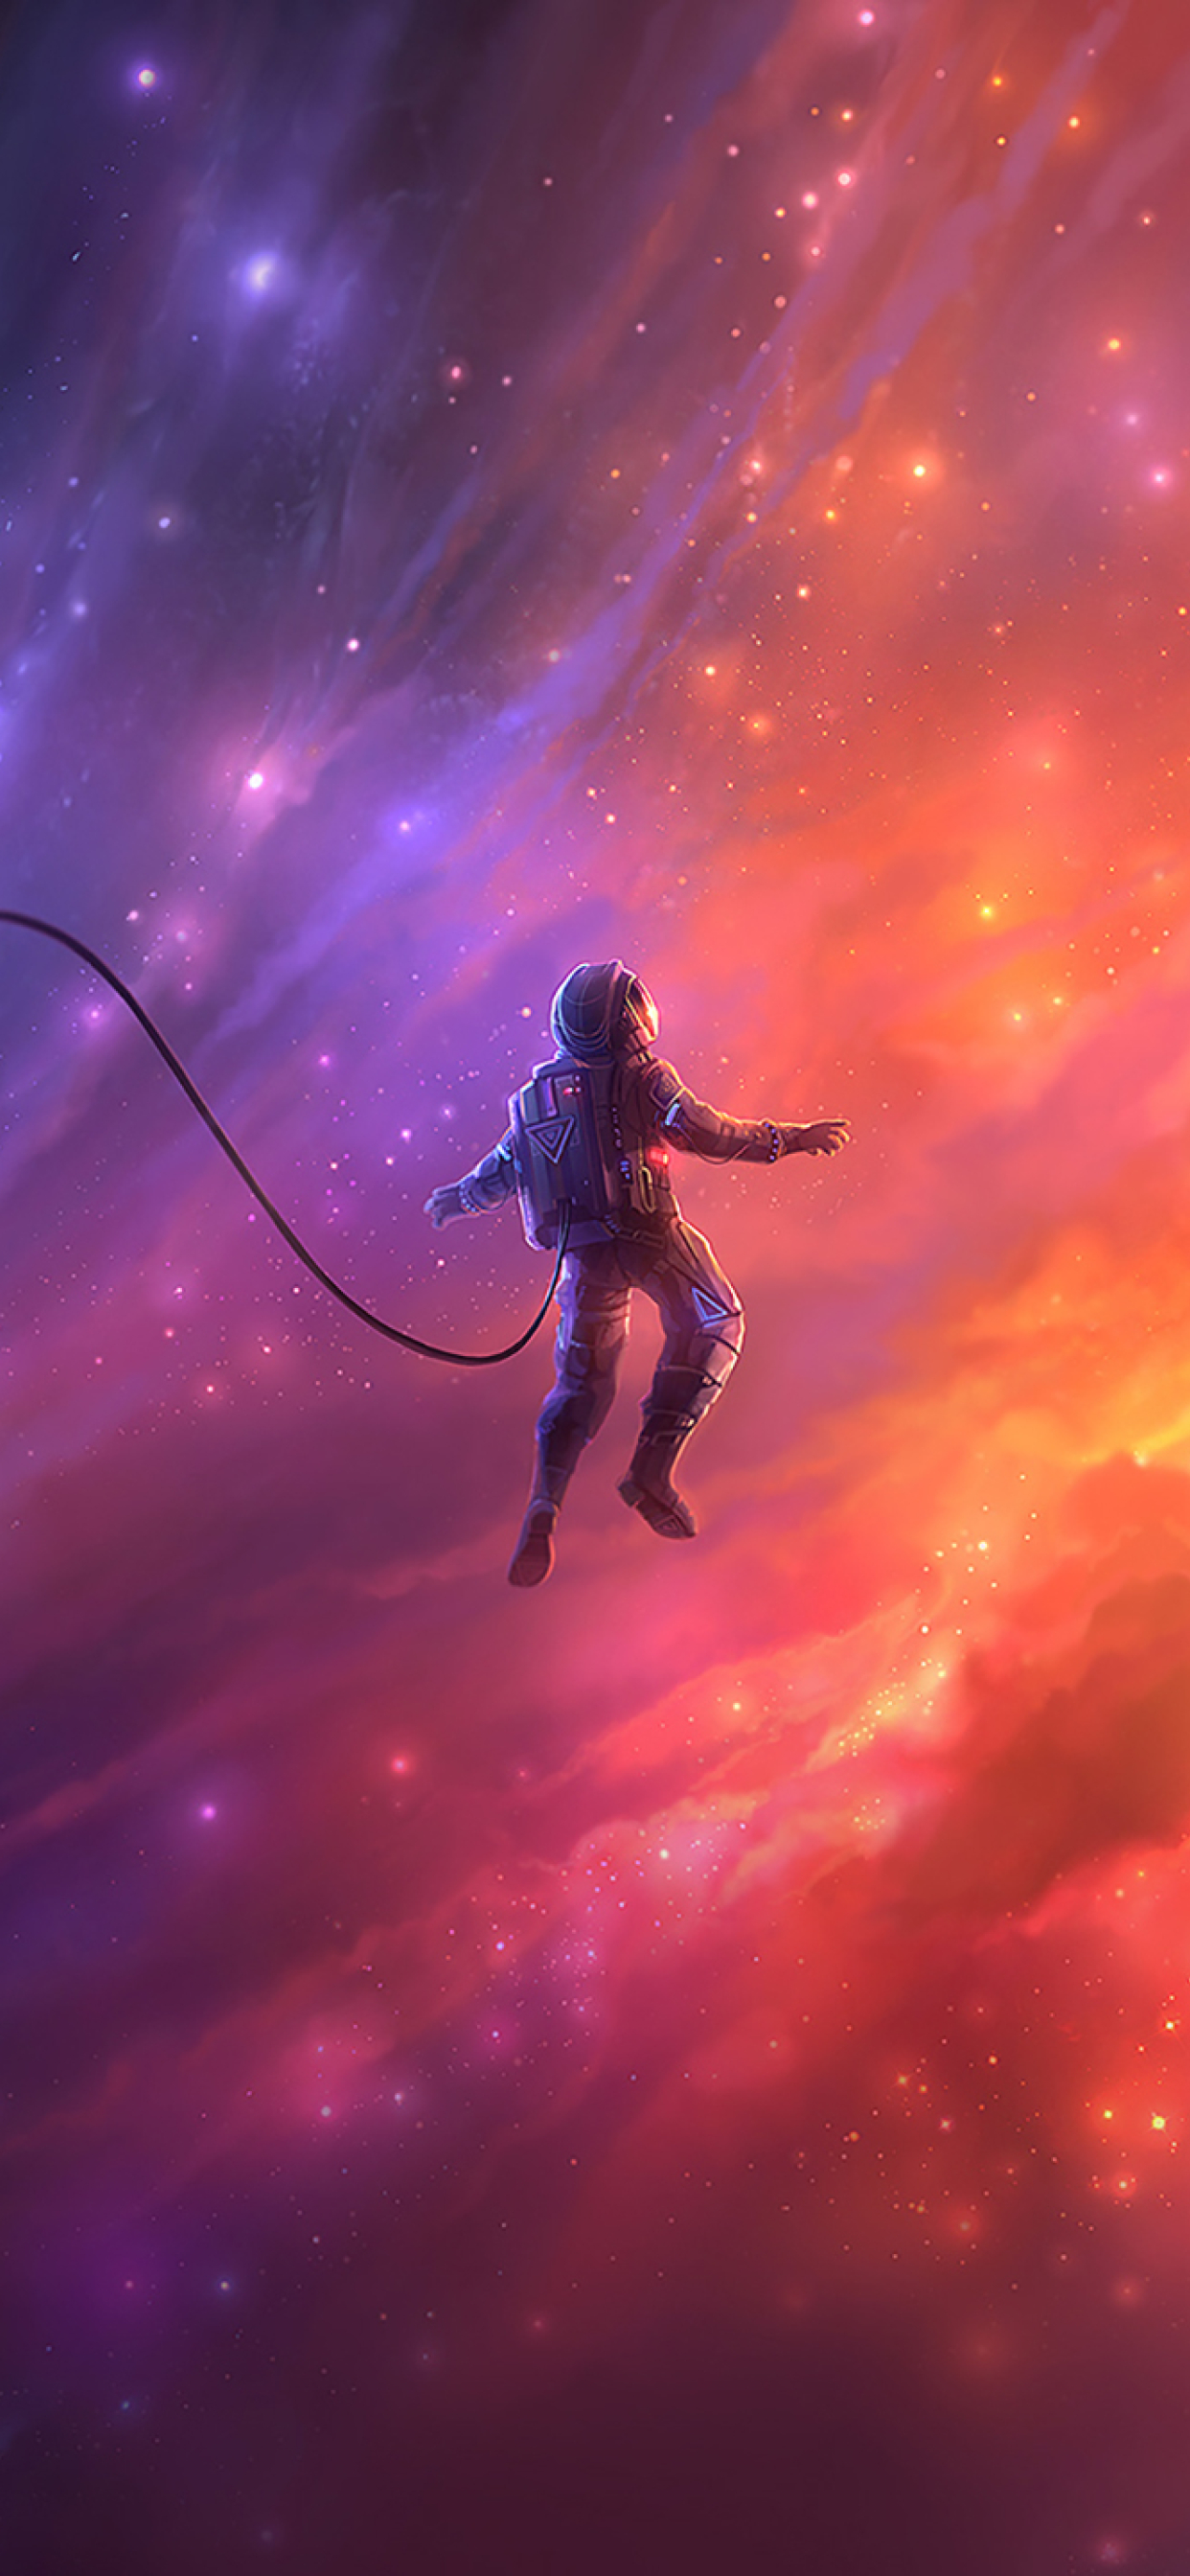 1242x2688 Astronaut In Space Iphone XS MAX Wallpaper, HD Fantasy 4K